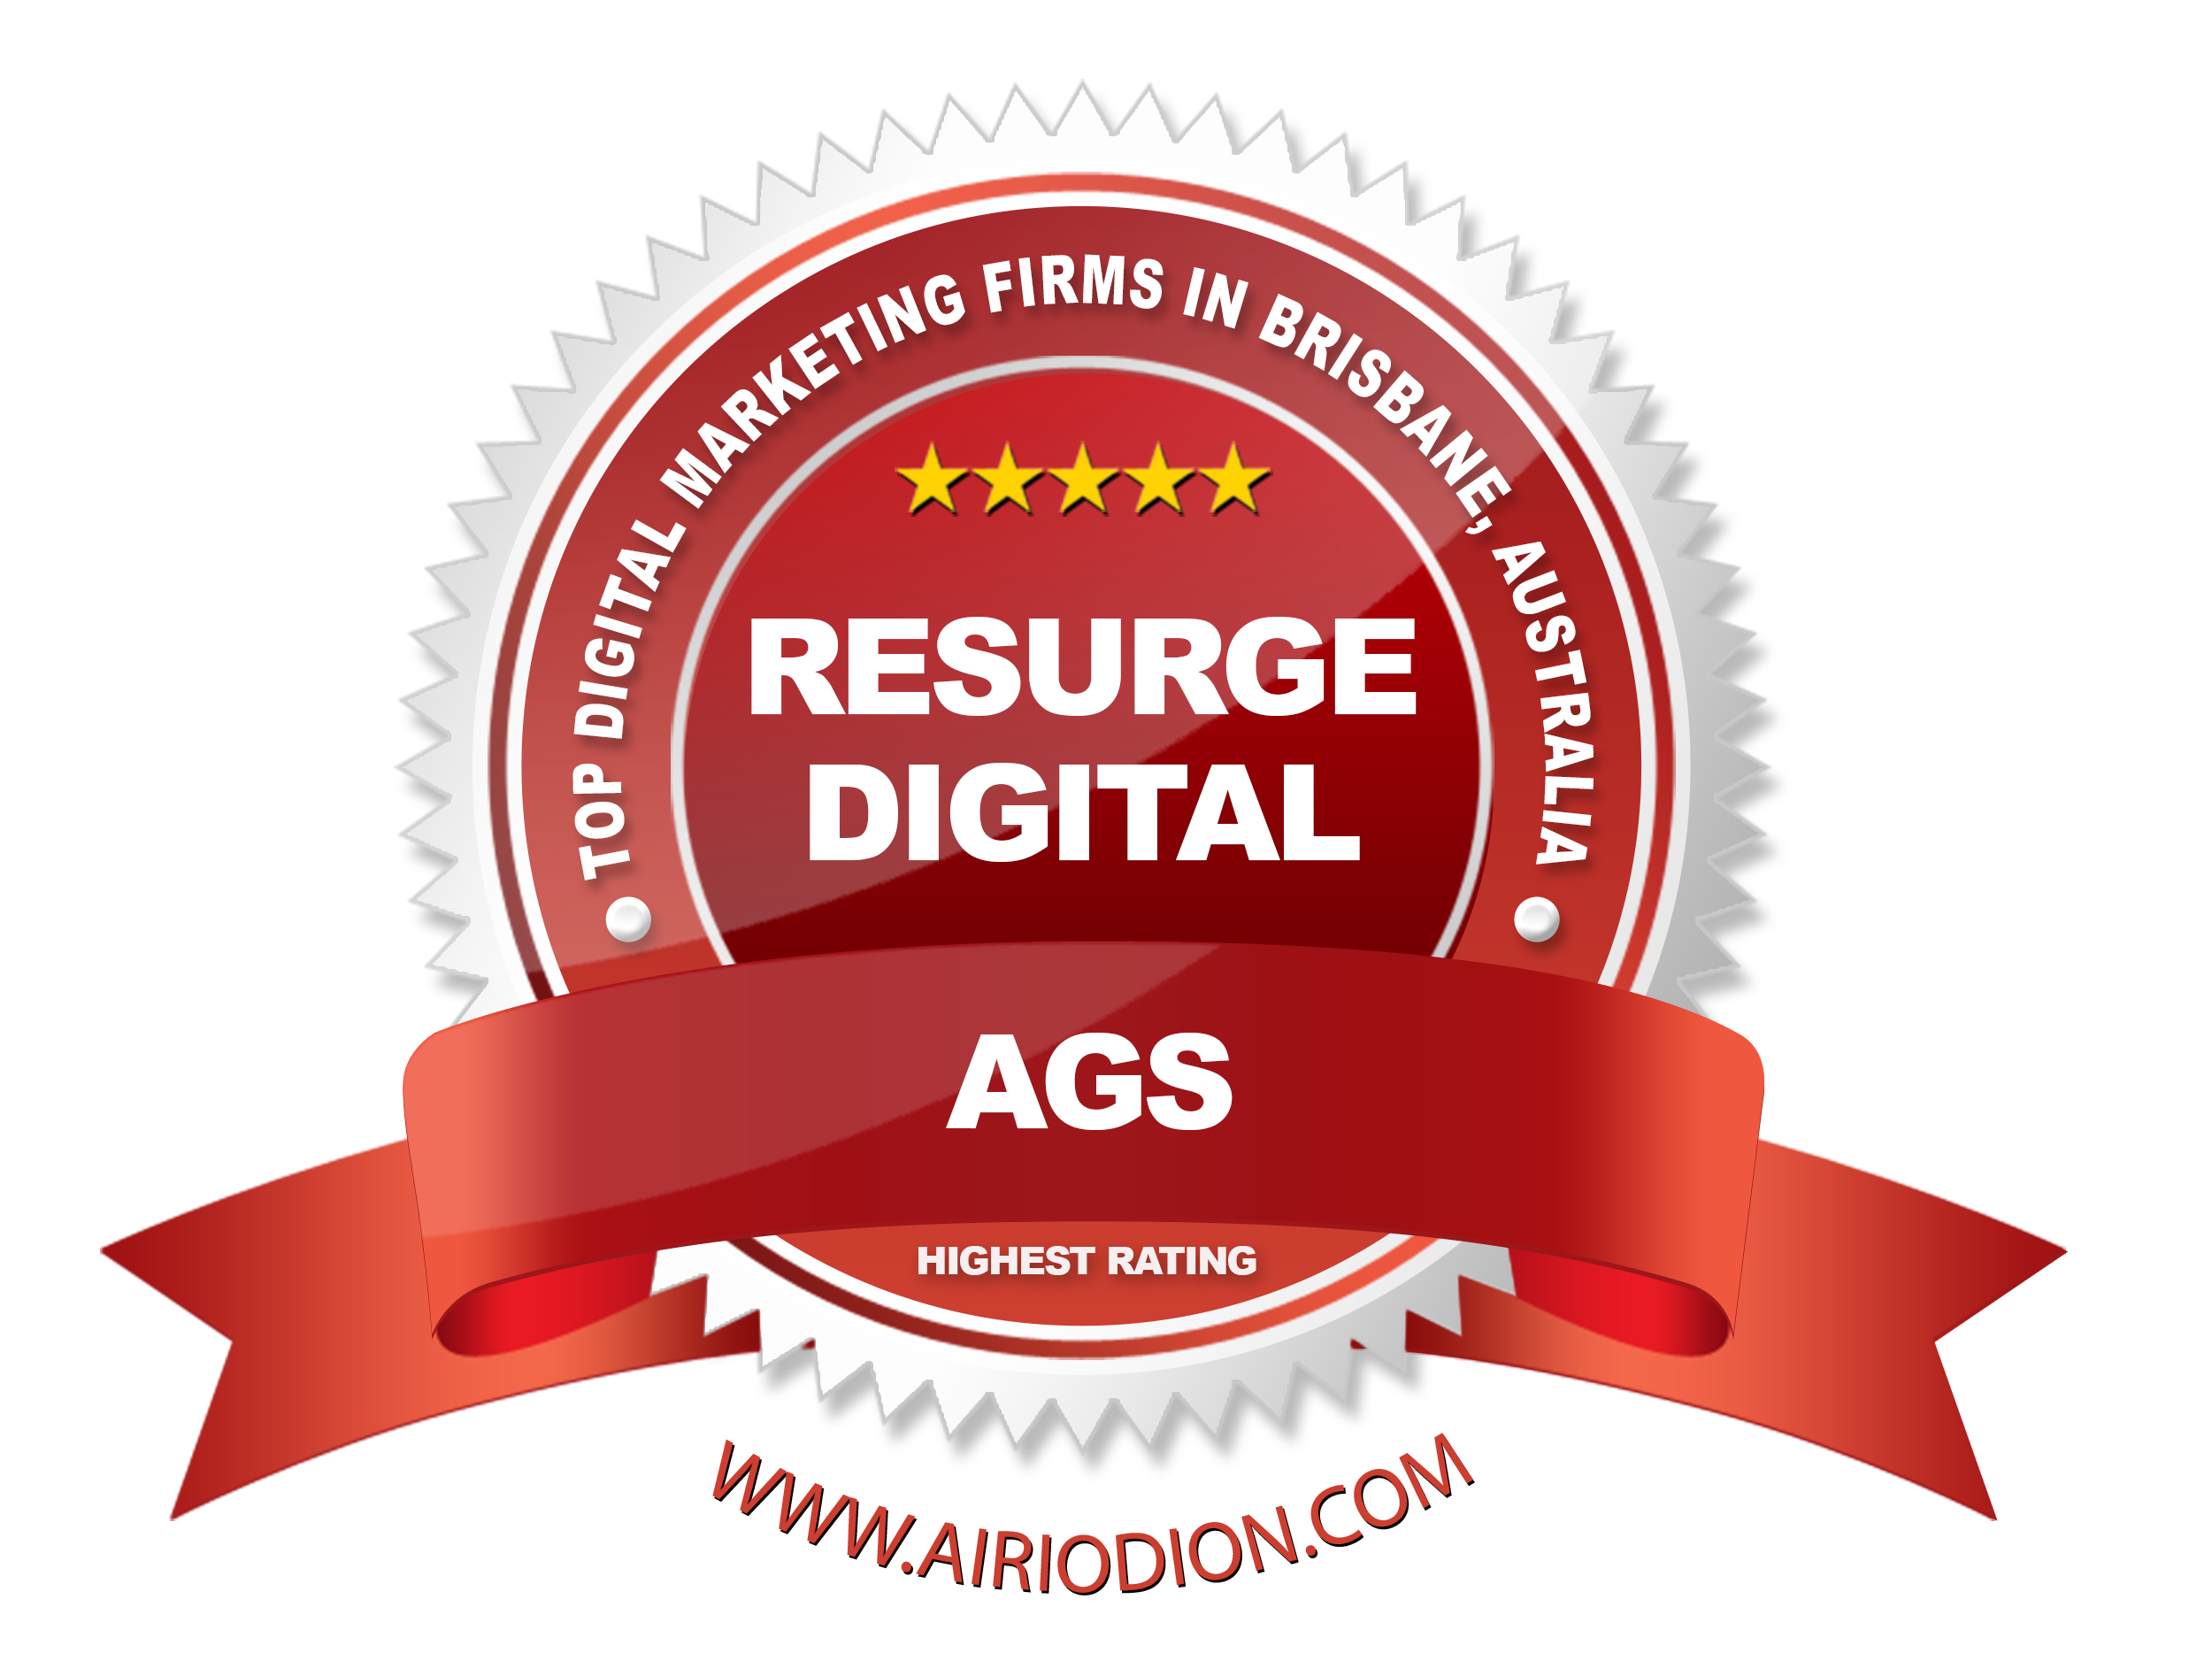 AGS Highest Rating Award for Resurge Digital as One of the Top Digital Marketing Firms in Brisbane Australia